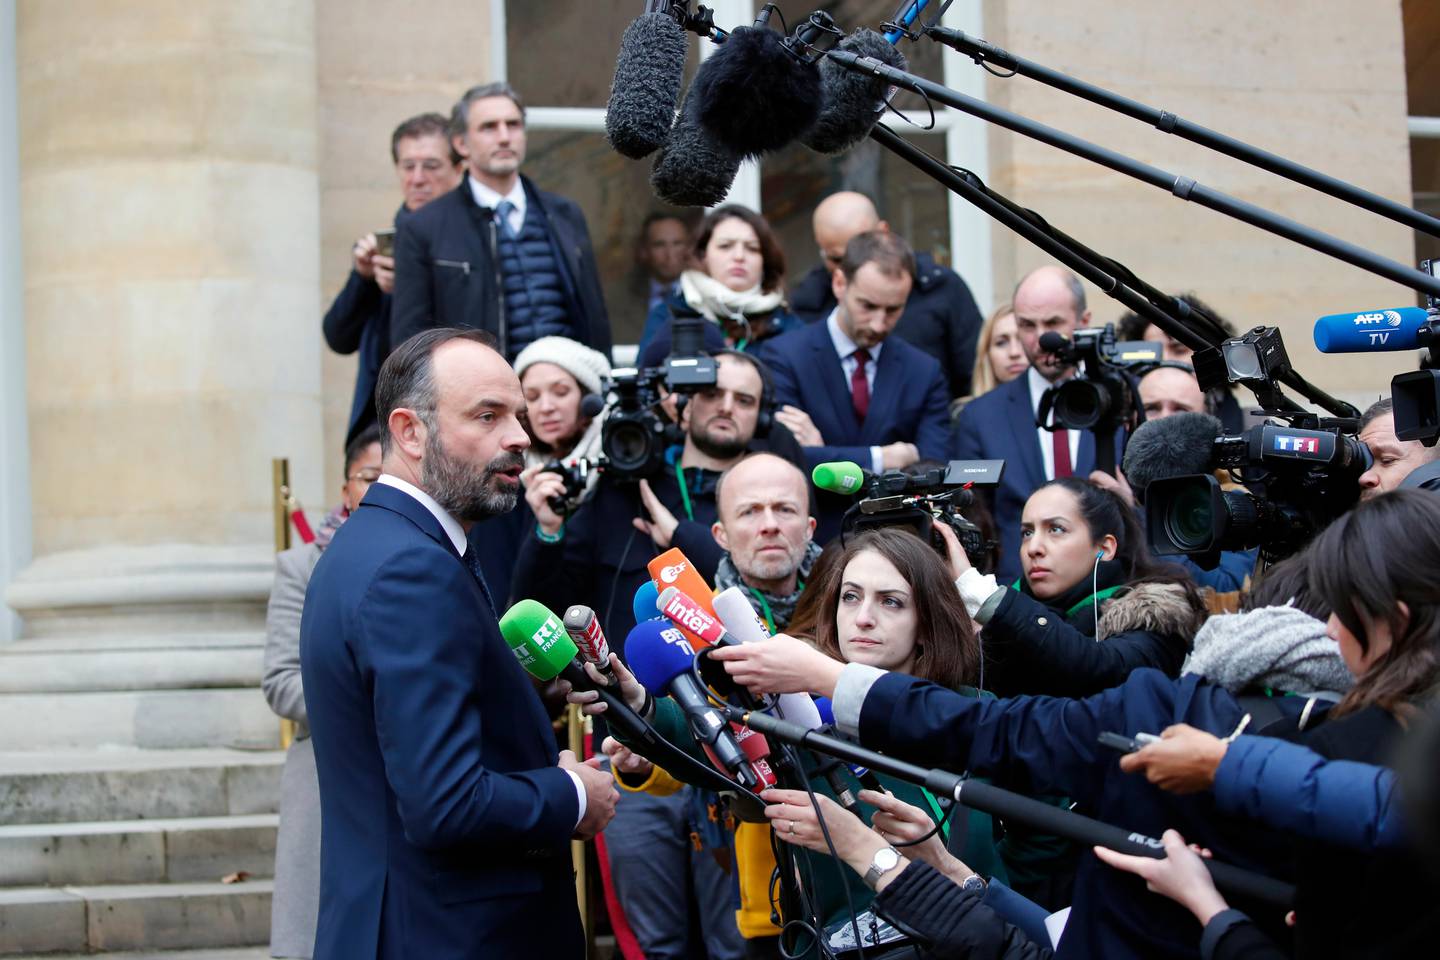 French Prime Minister Edouard Philippe delivers a statement after a meeting with unions representatives, in Paris Tuesday Jan. 7, 2020. Negotiations to end record-setting strikes that have hobbled France's train network and made commuting miserable for Parisians are resuming Tuesday between the government and unions. (AP Photo/Francois Mori)